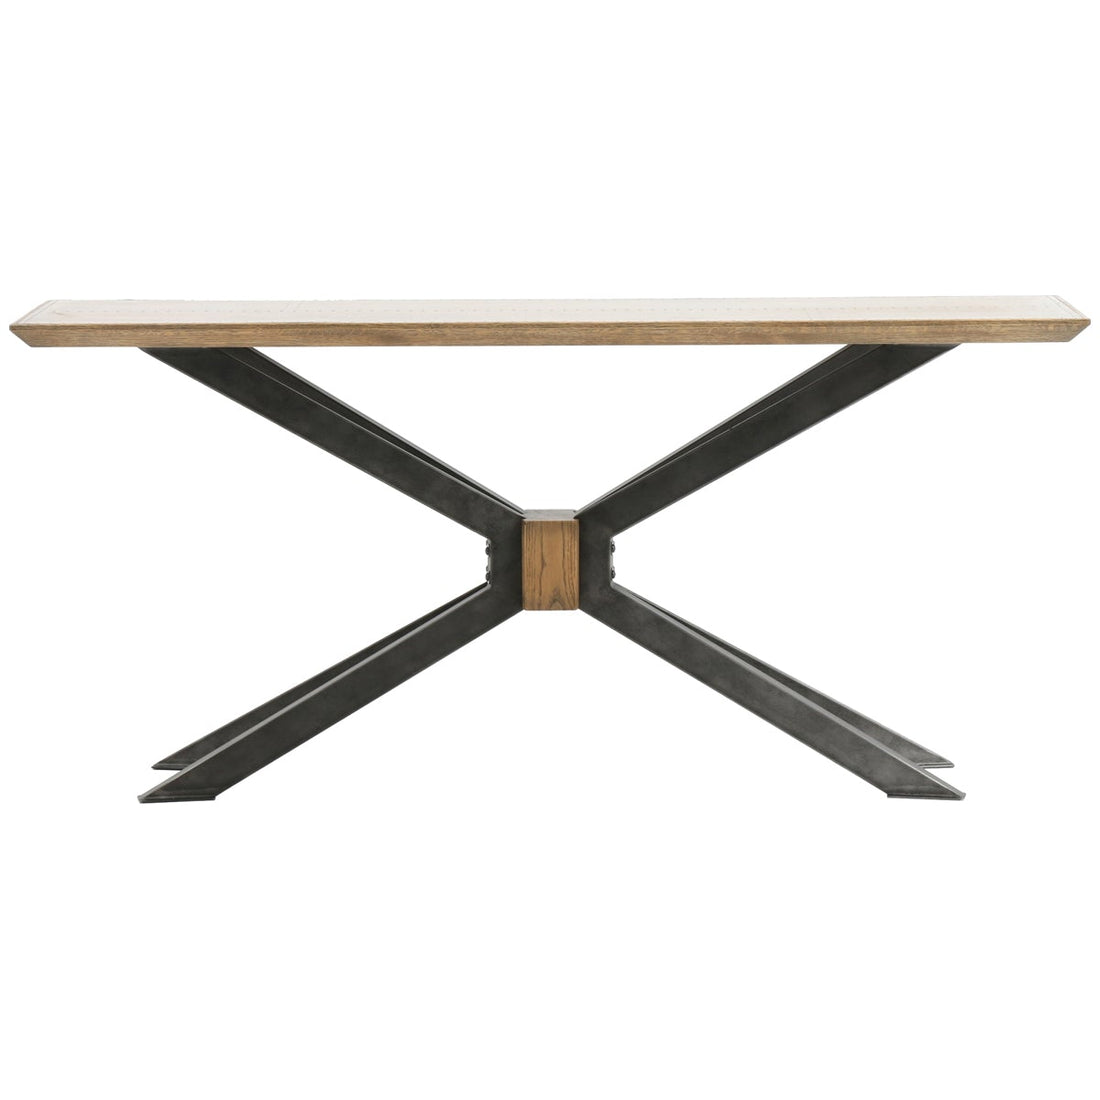 Four Hands Hughes Spider Console Table - Bright Brass Clad